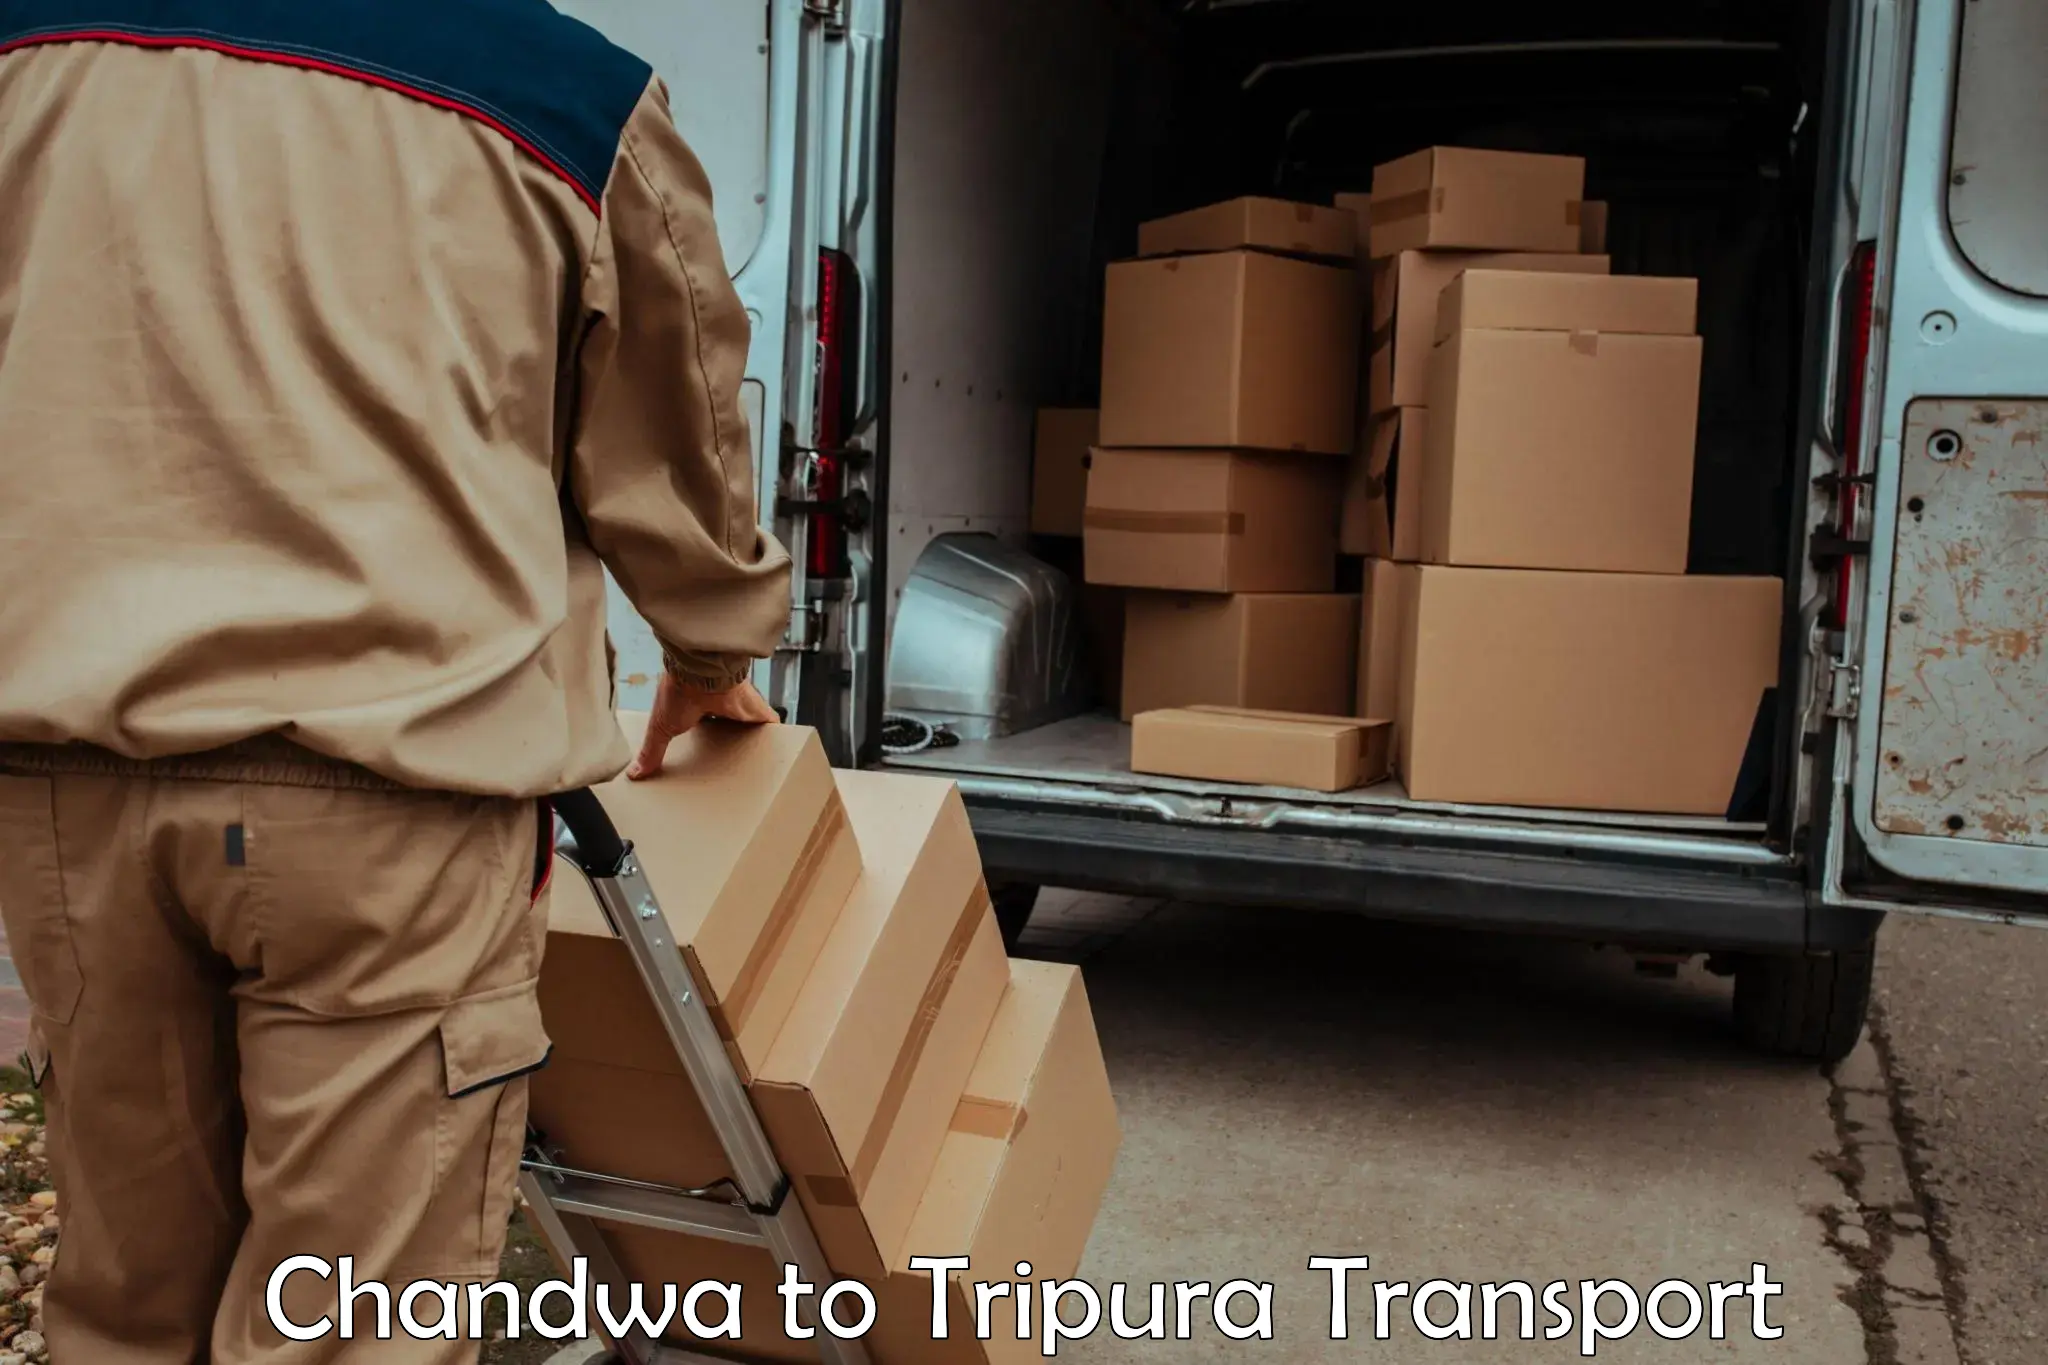 Part load transport service in India Chandwa to Udaipur Tripura